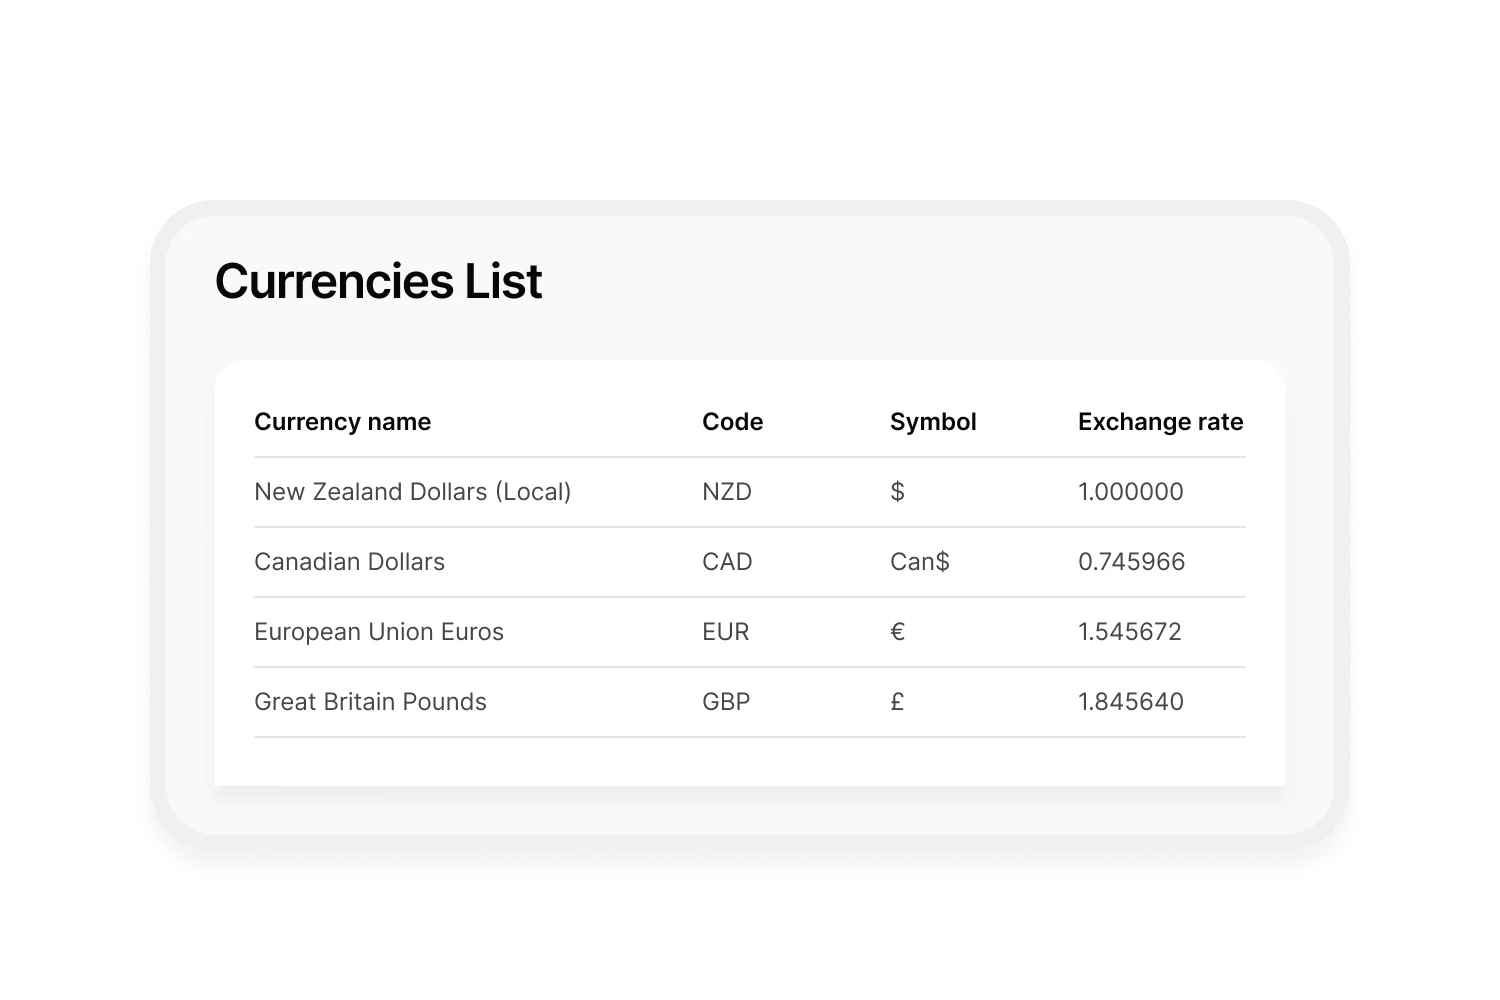 Currency list of multiple international currencies 